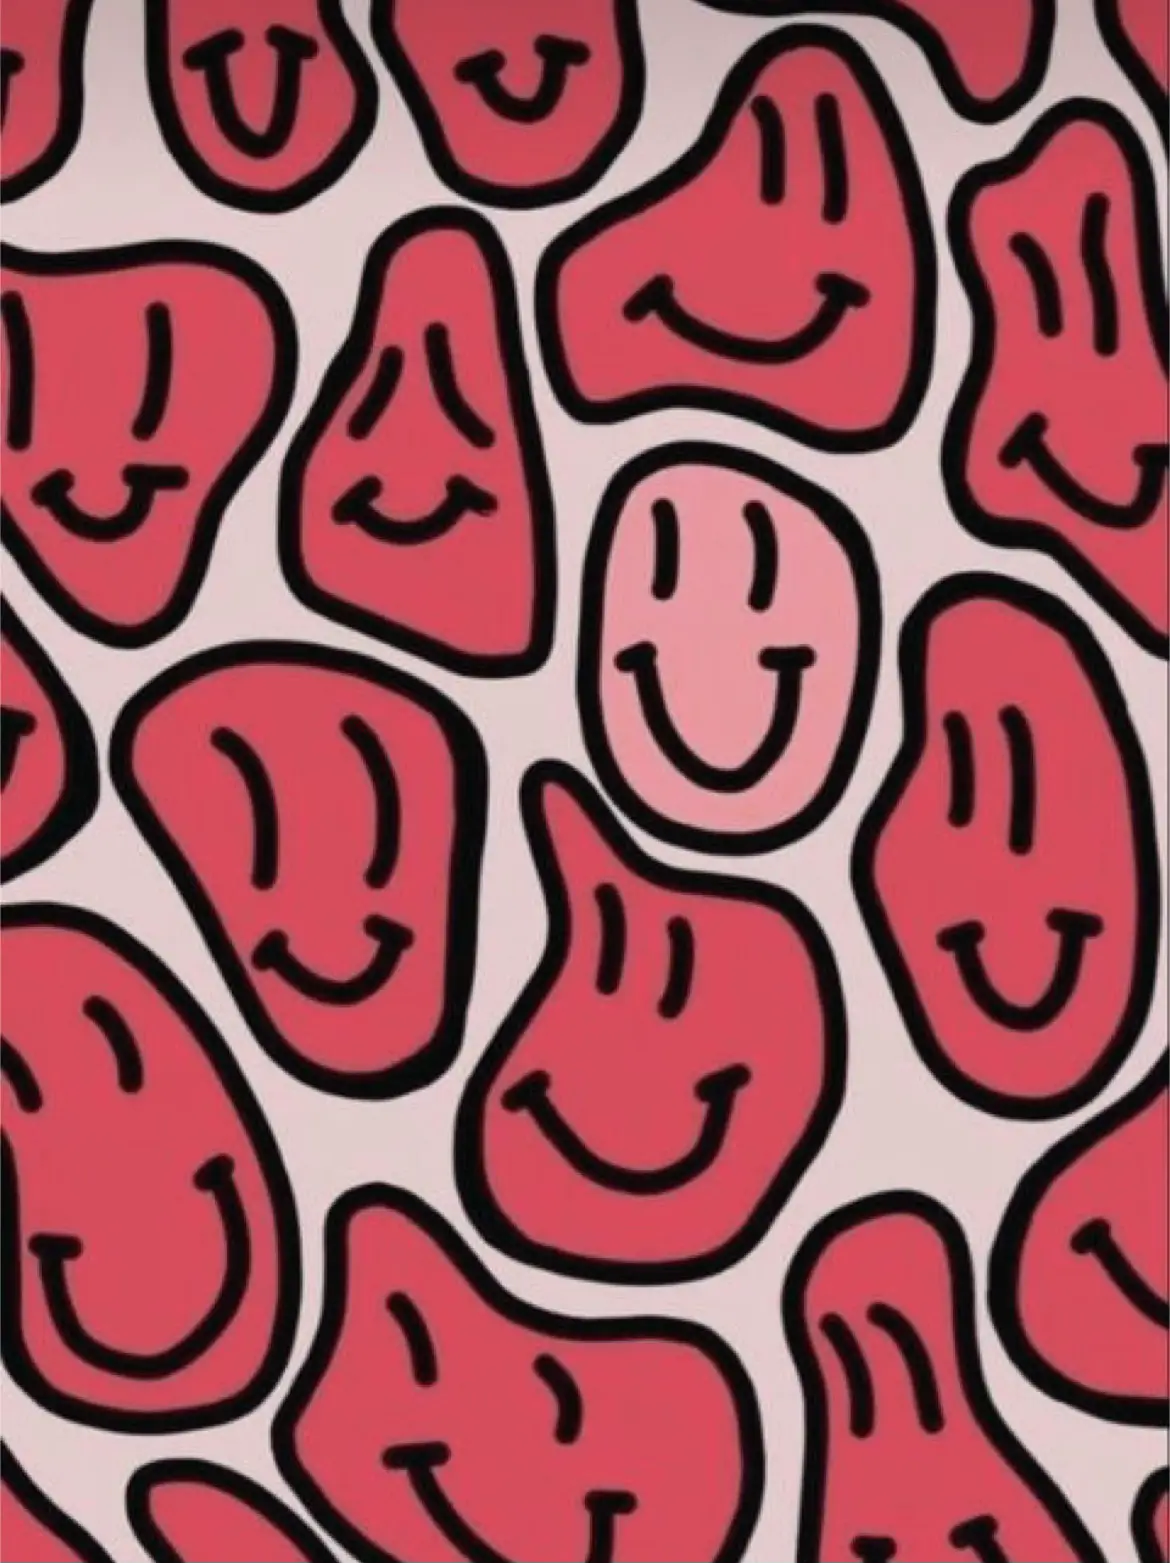 SMILEY FACE WALLPAPERS ☻